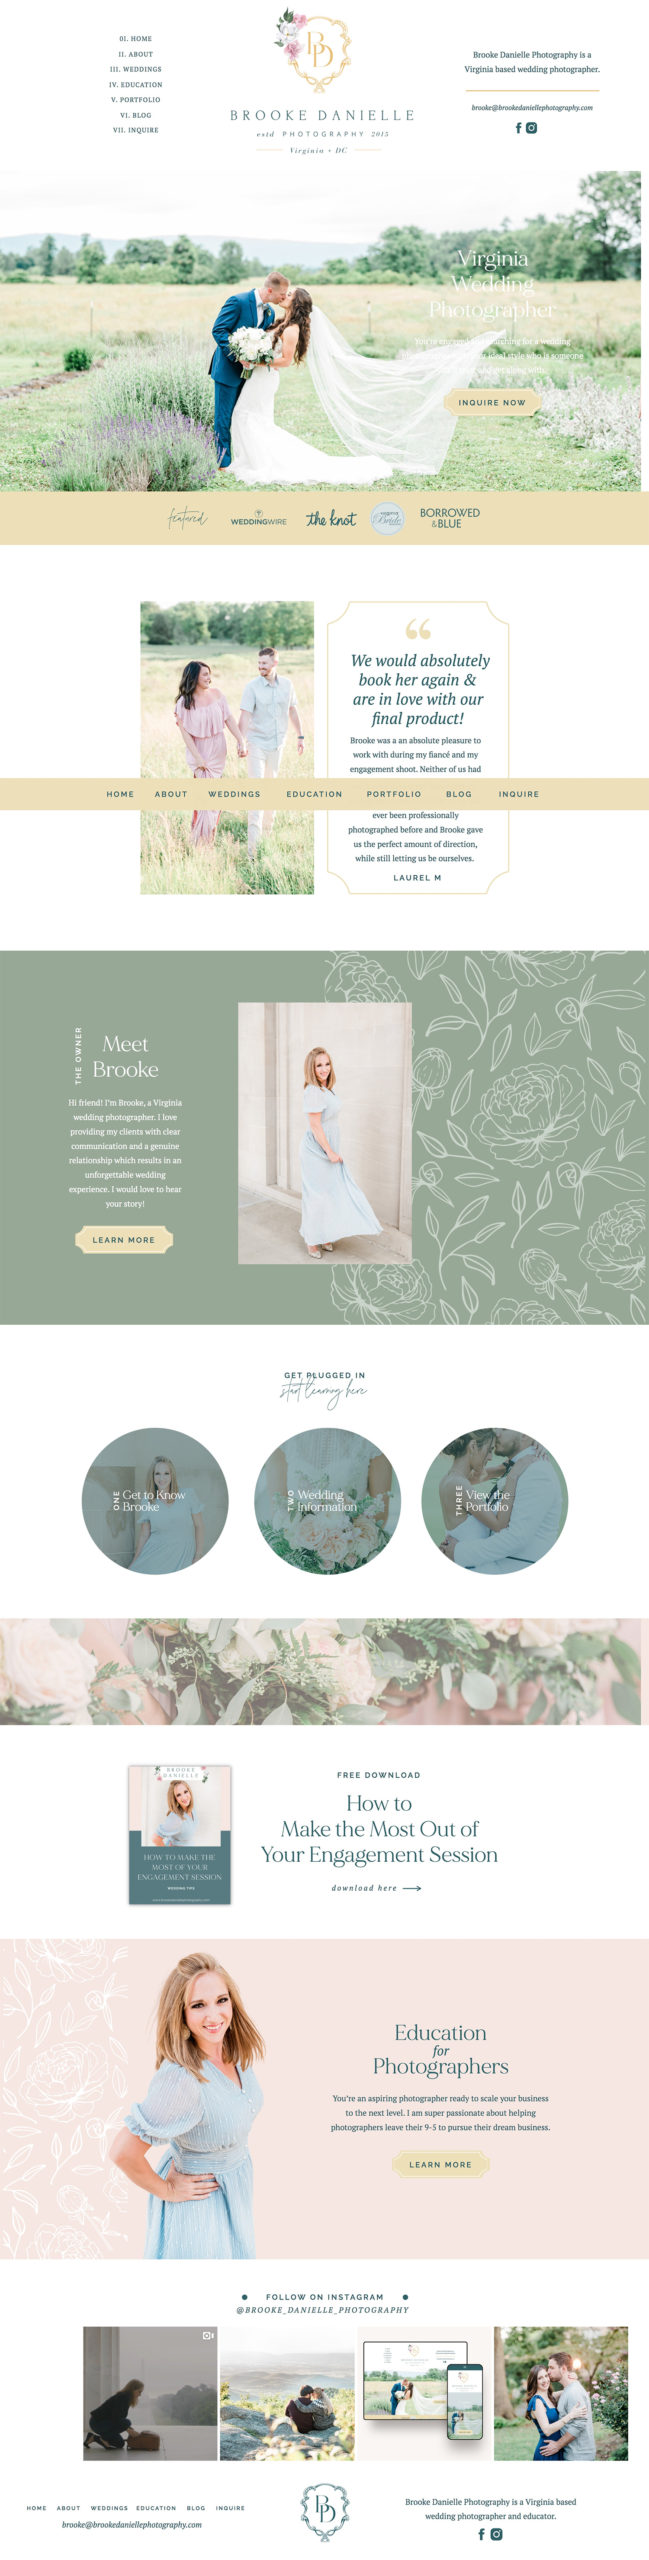 custom showit website design / branding for wedding businesses photographers / showit template / showit help / ribbon and ink